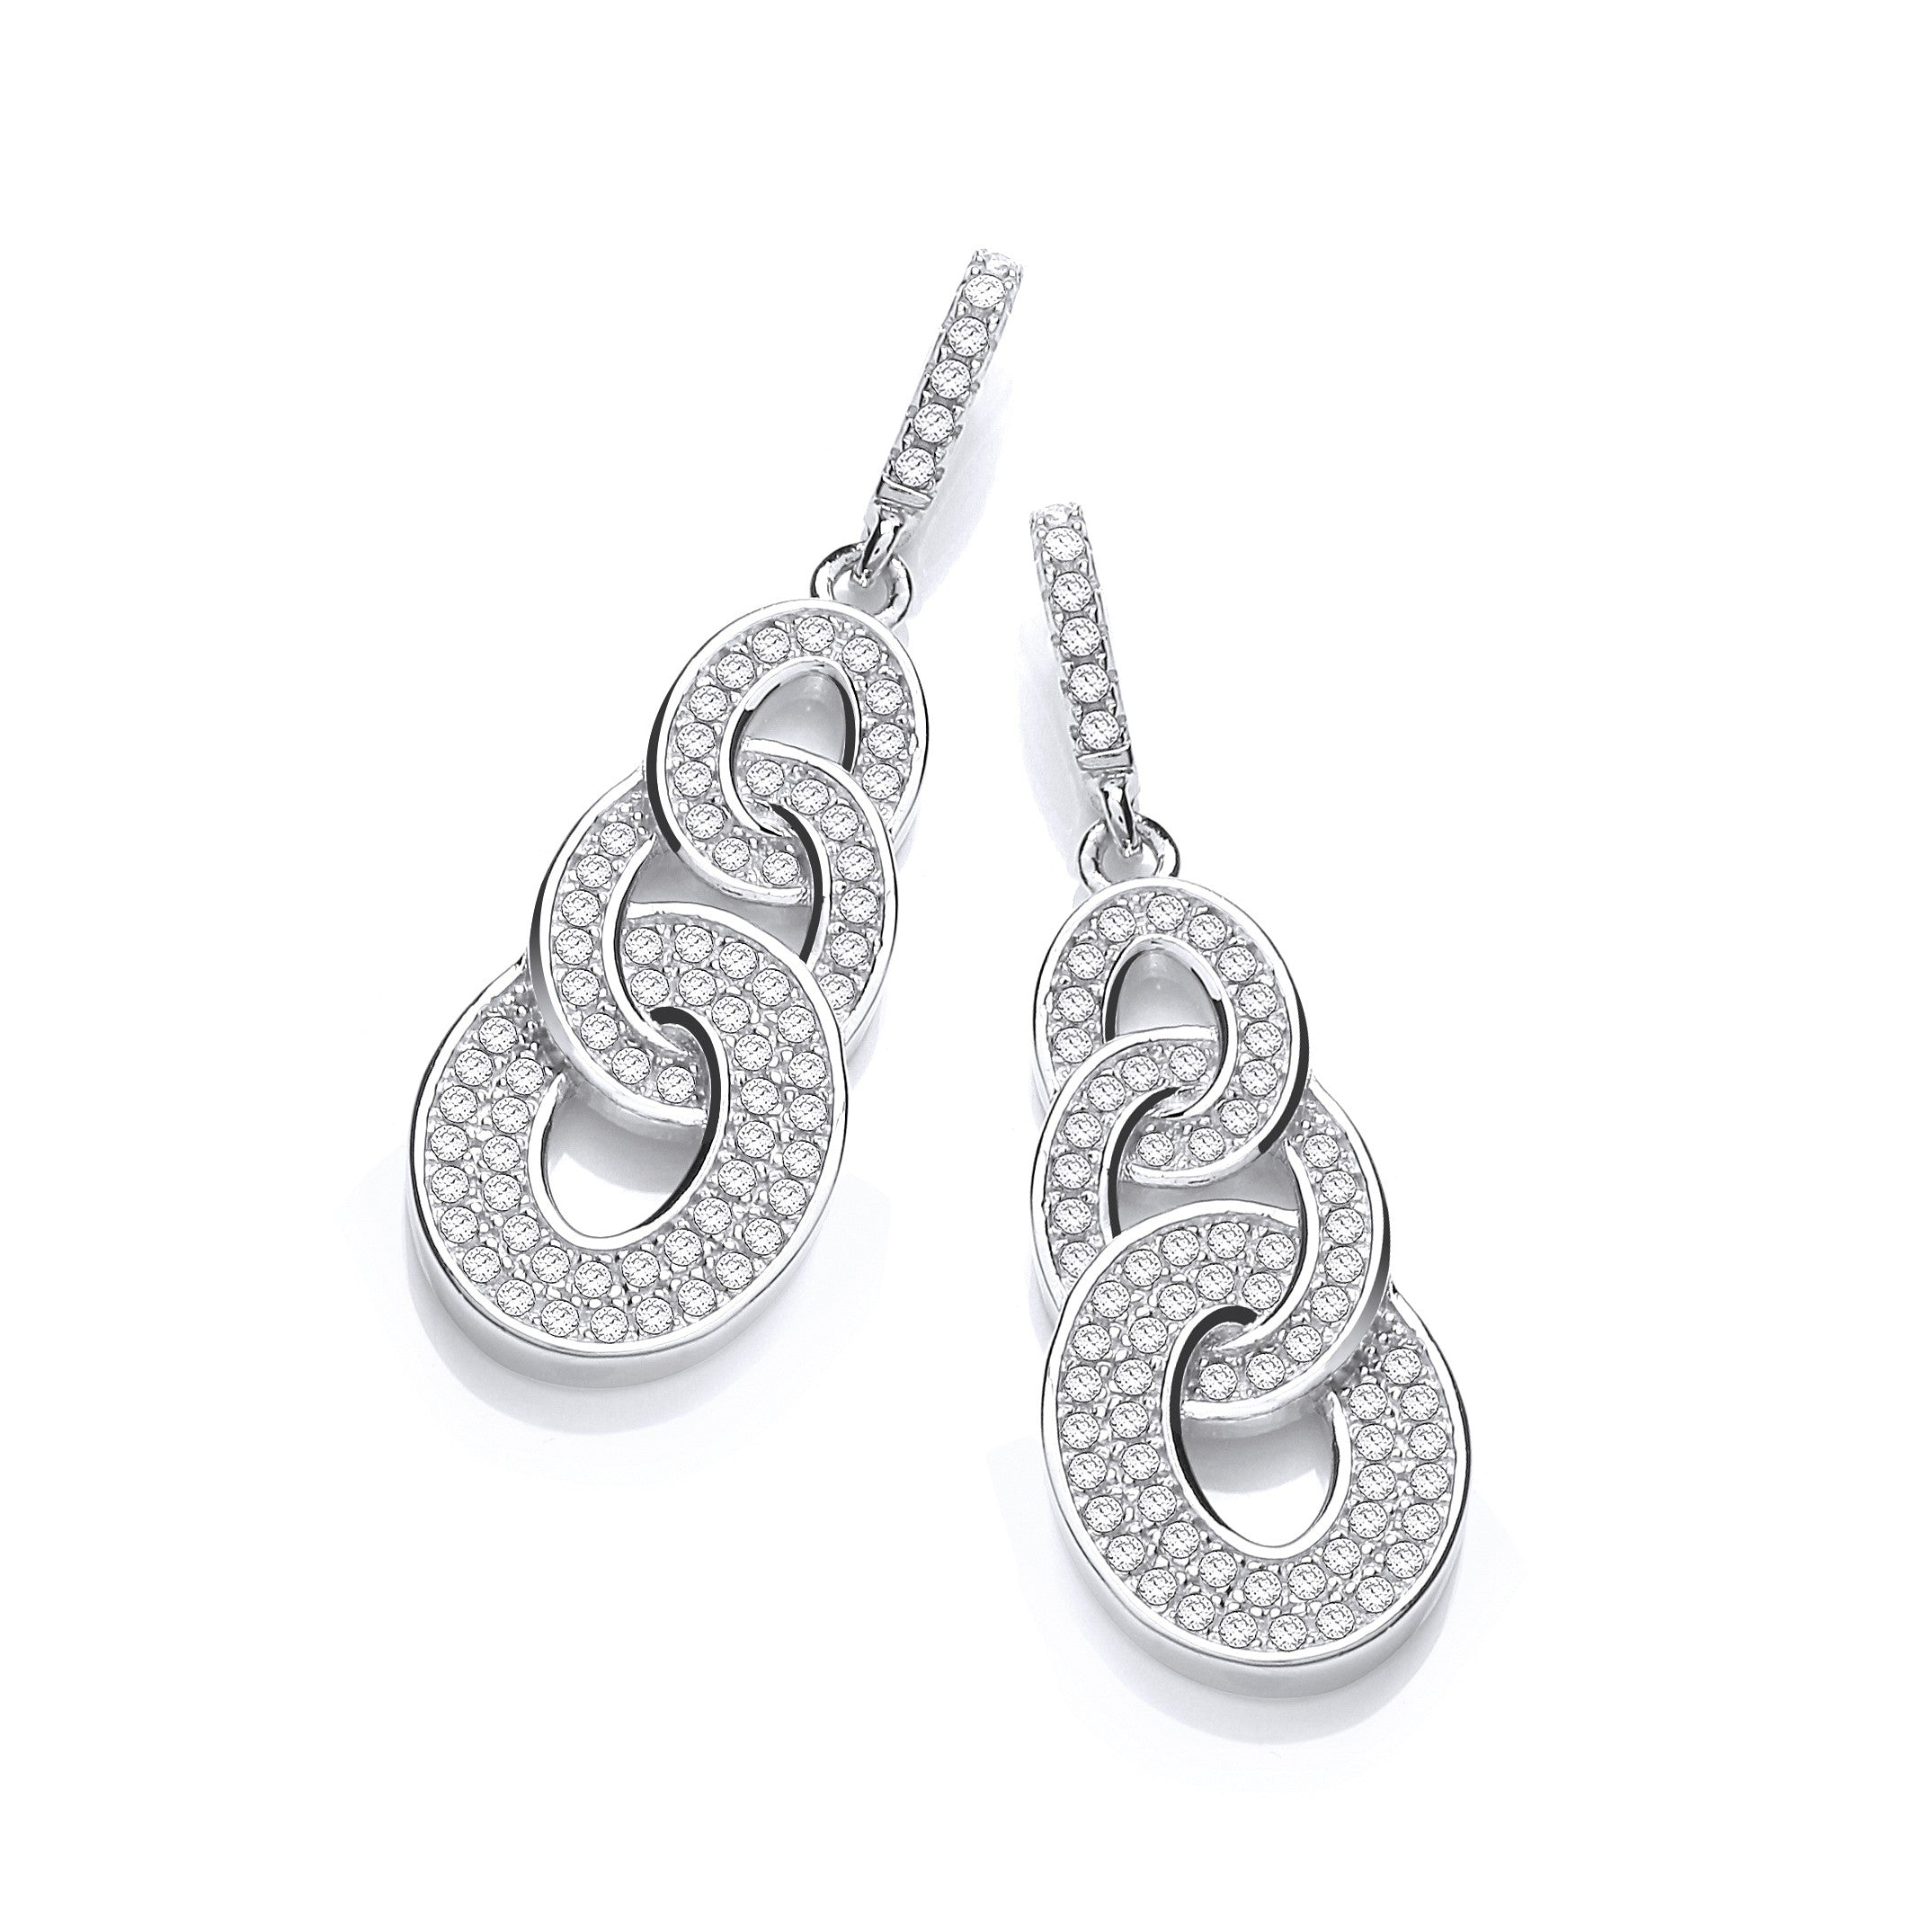 Micro Pave' Oval Intertwined Cz Drop Earrings